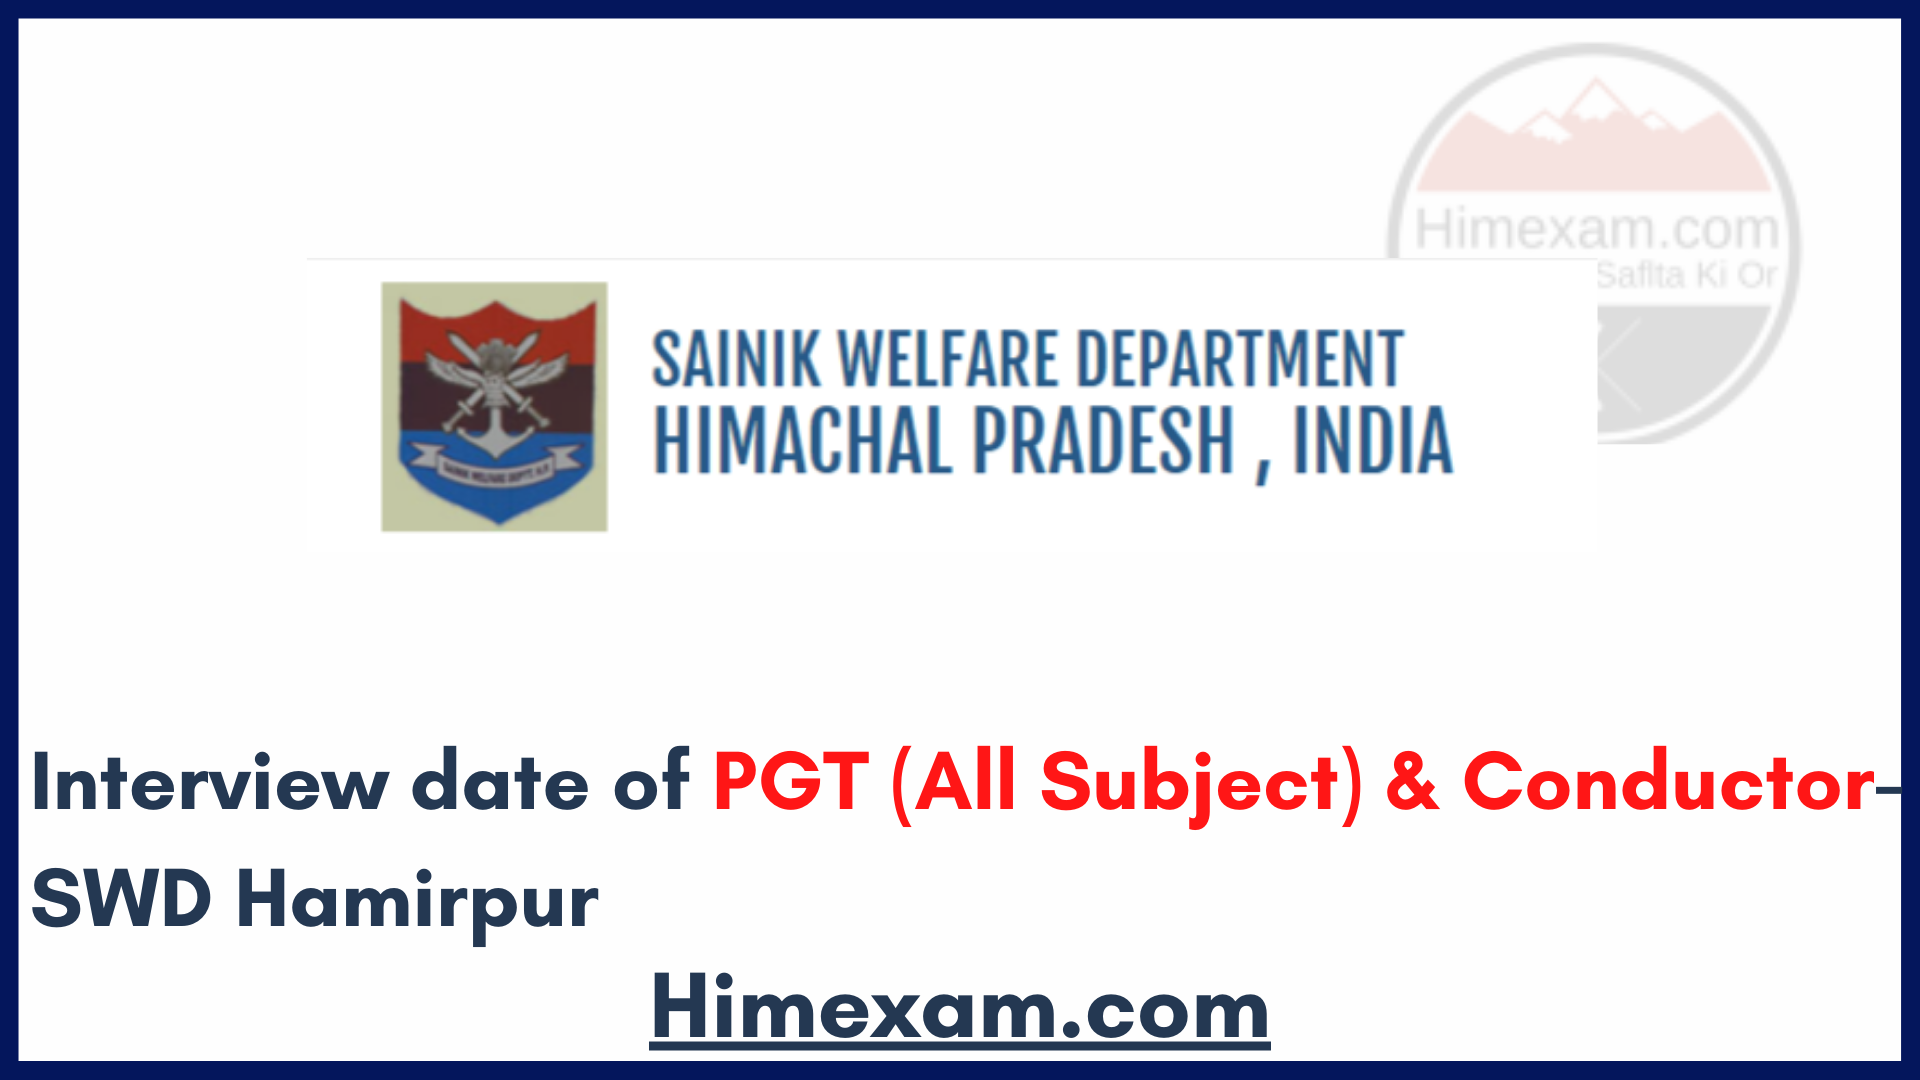 Interview date of PGT (All Subject) & Conductor-SWD Hamirpur